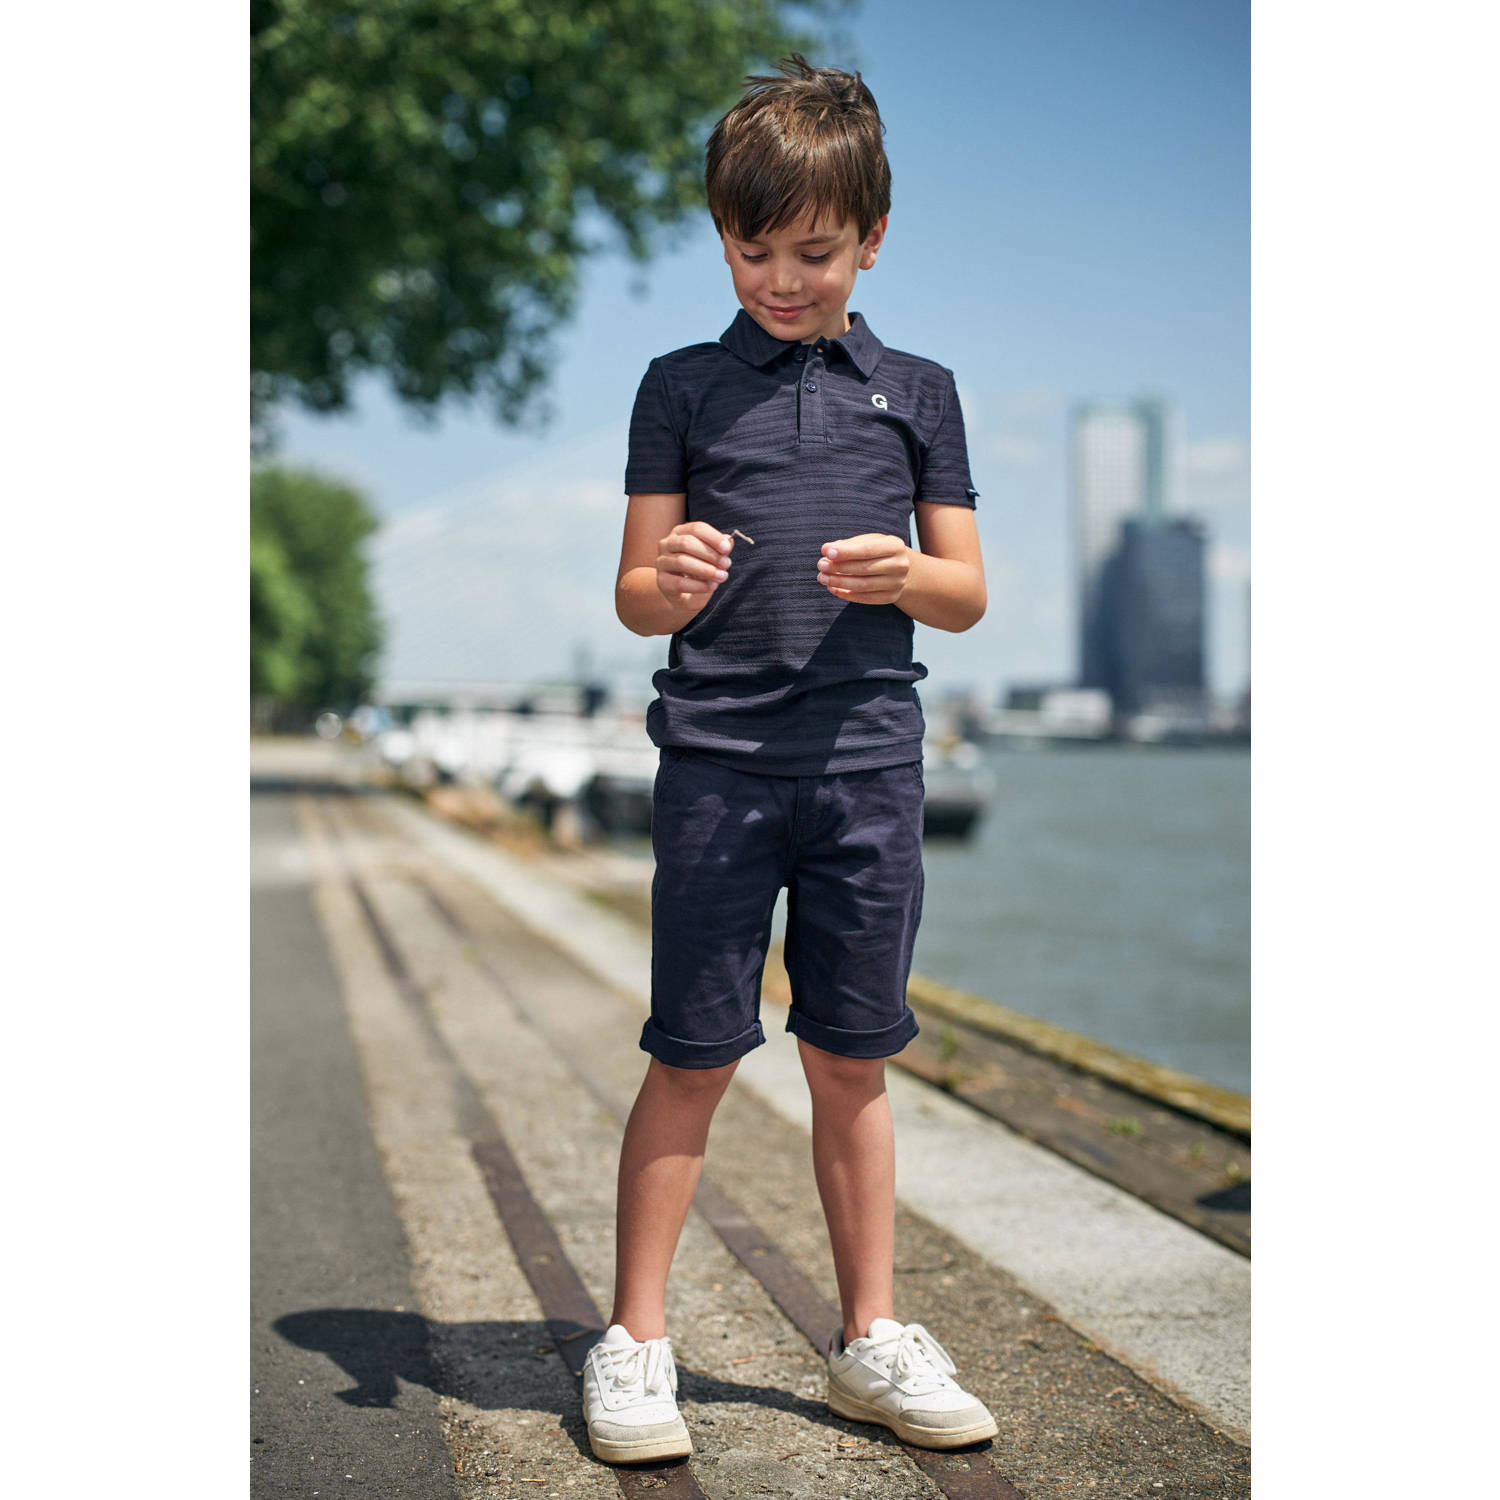 Le Chic Garcon polo NEILY donkerblauw